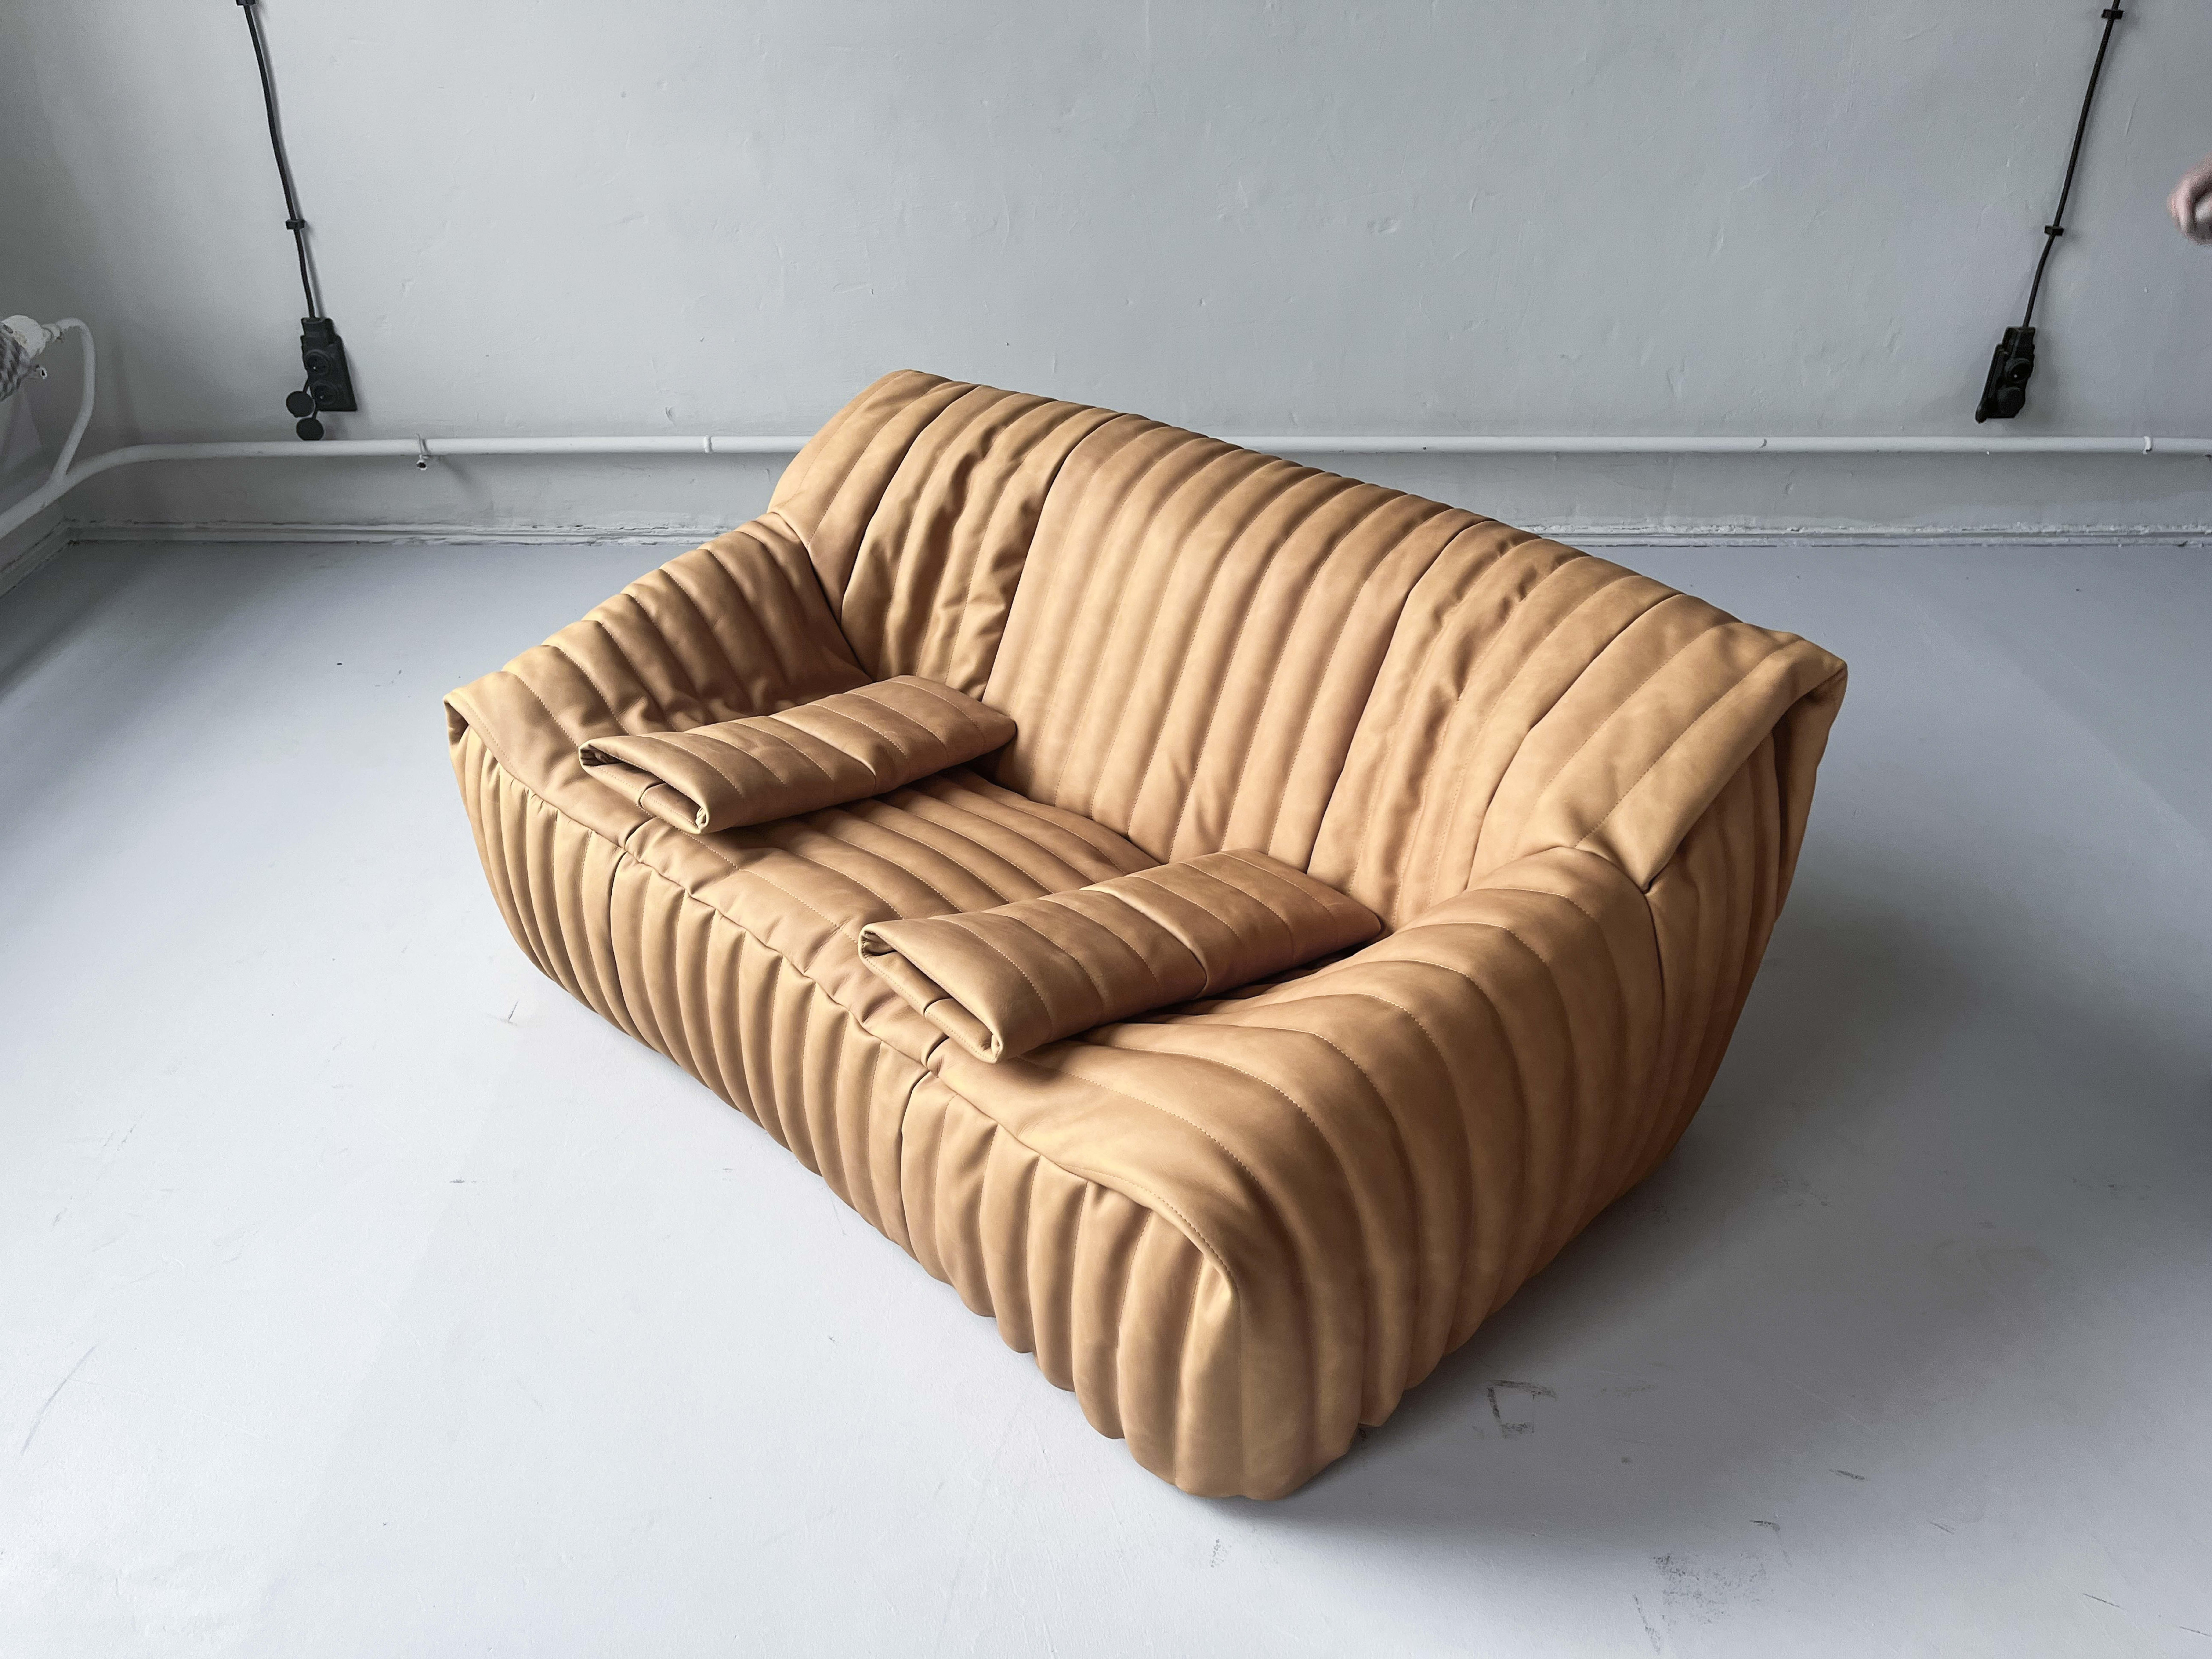  Sandra sofa  designed by Annie Hiéronimus for Cinna after she joined the Roset Bureau d’Etudes in 1976. 
 The inside of the sofa consists entirely of polyether foam and is, therefore, feather-light and above all very comfortable. 
2 seater sofa